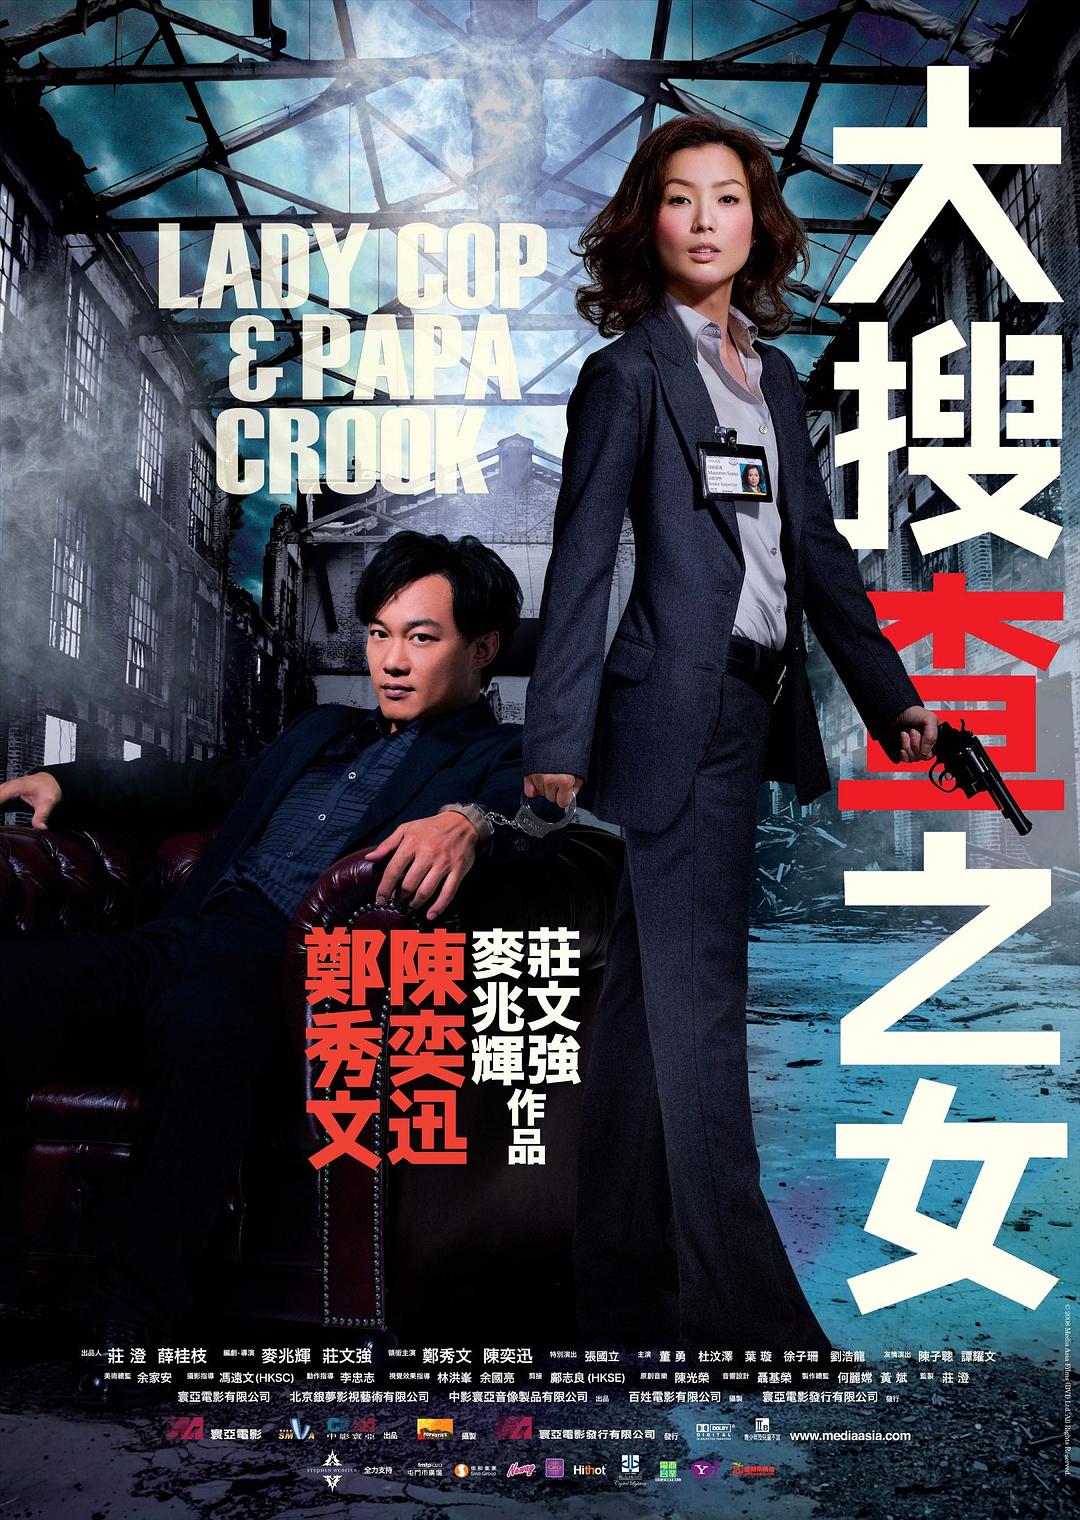 Ѳ֮Ů Lady.Cop.and.Papa.Crook.2008.DC.CHINESE.1080p.BluRay.REMUX.AVC.TrueHD.7.1--1.png